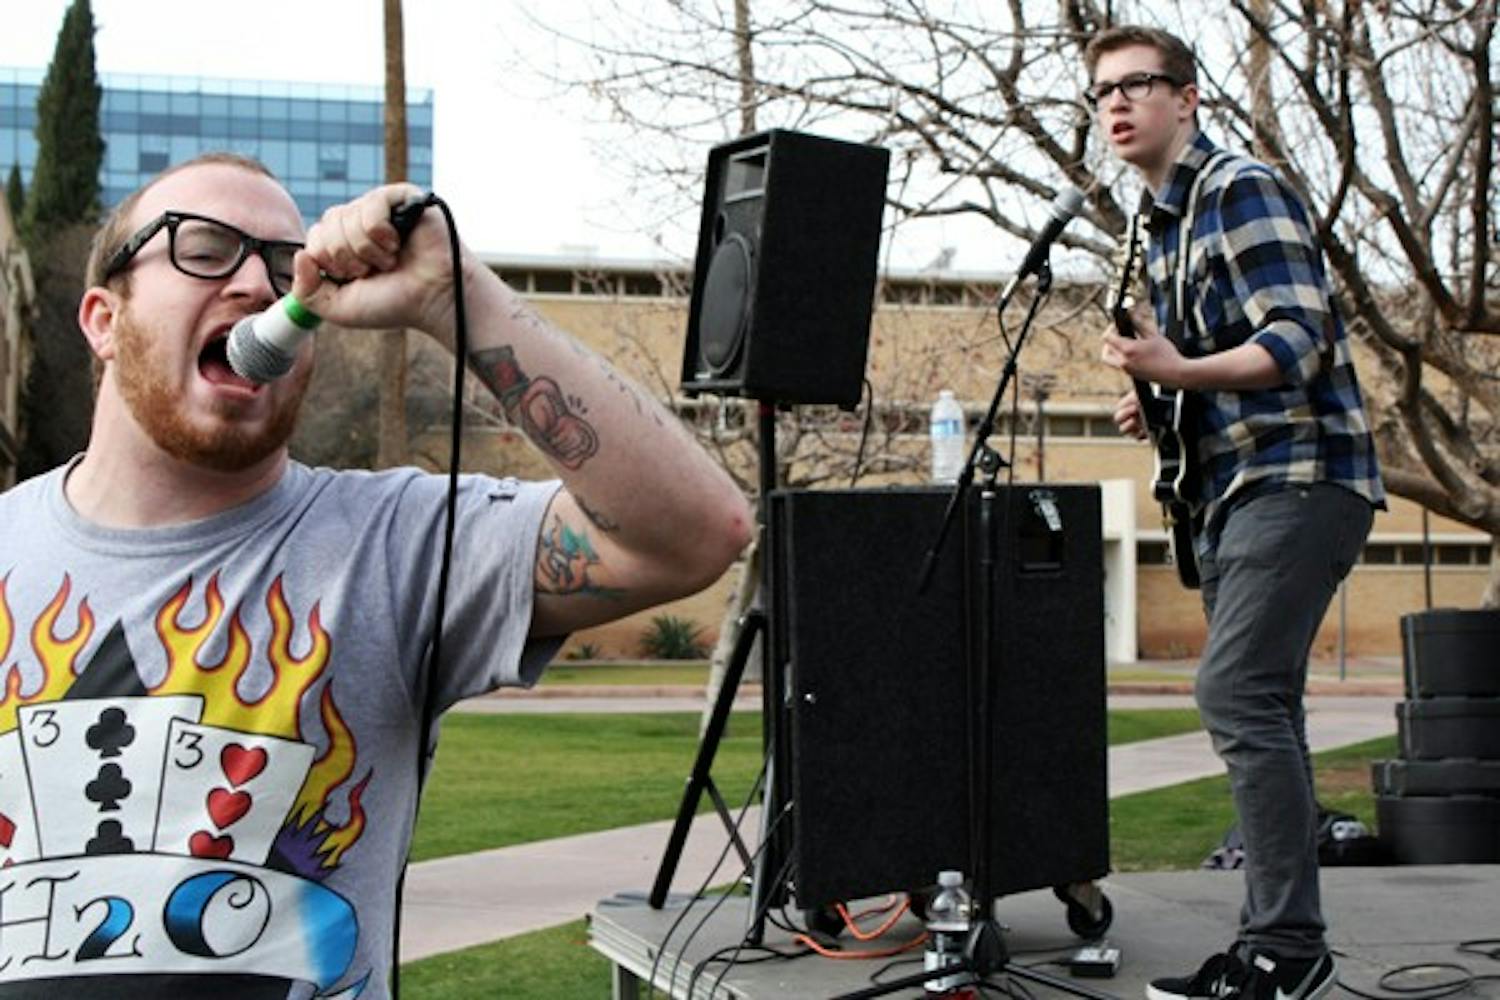 The Sheds, a band from Agoura Hills, Cali., perform on Hayden Lawn on the Tempe campus Wednesday afternoon. (Photo by Jessie Wardarski)